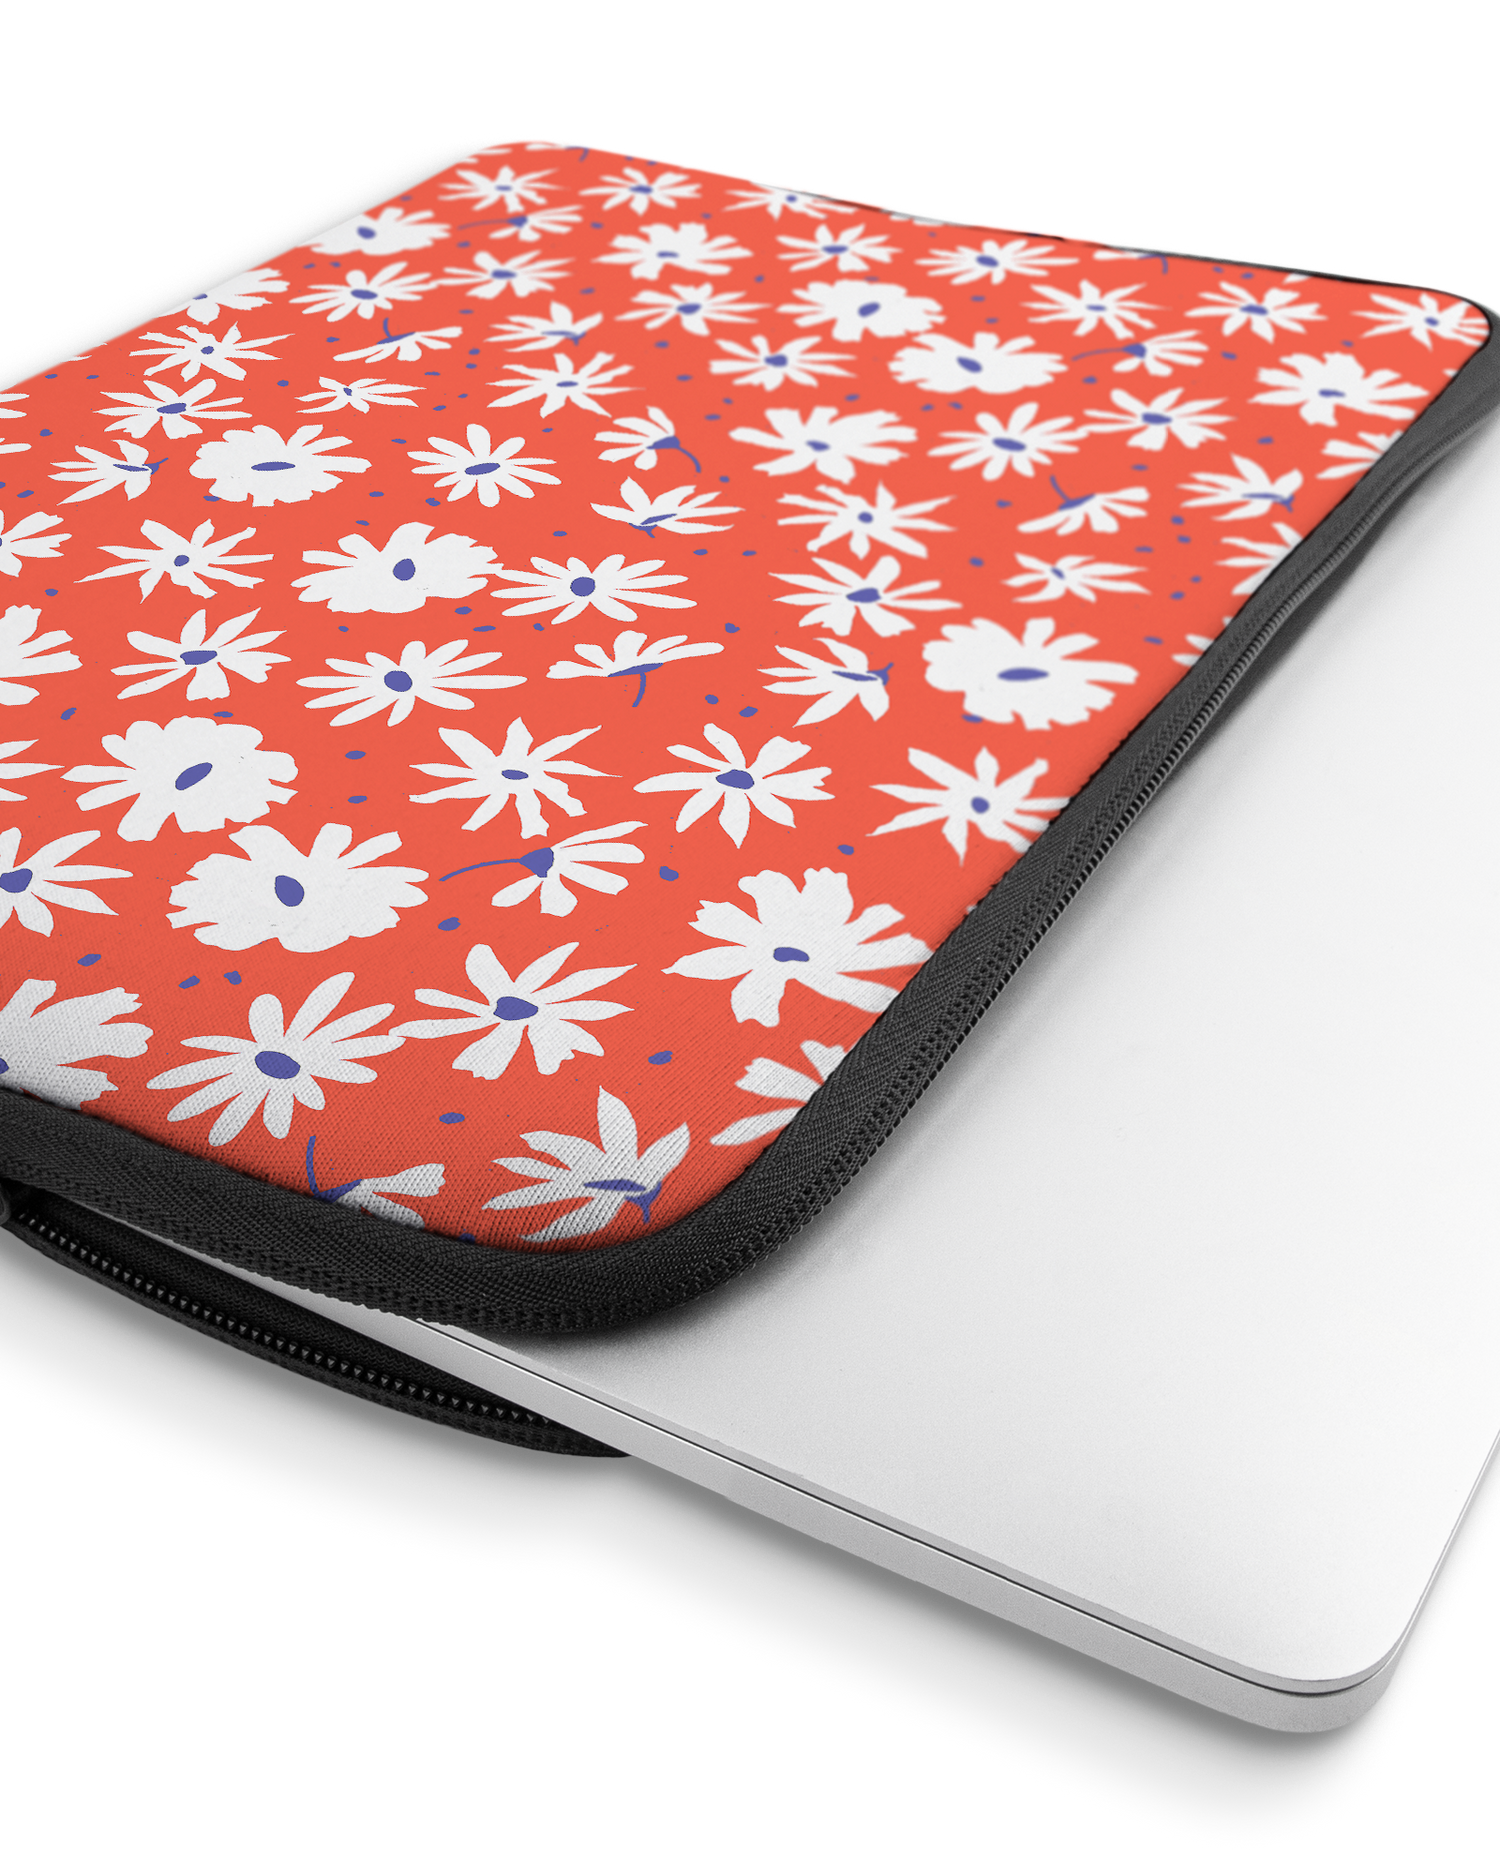 Retro Daisy Laptop Case 16 inch with device inside